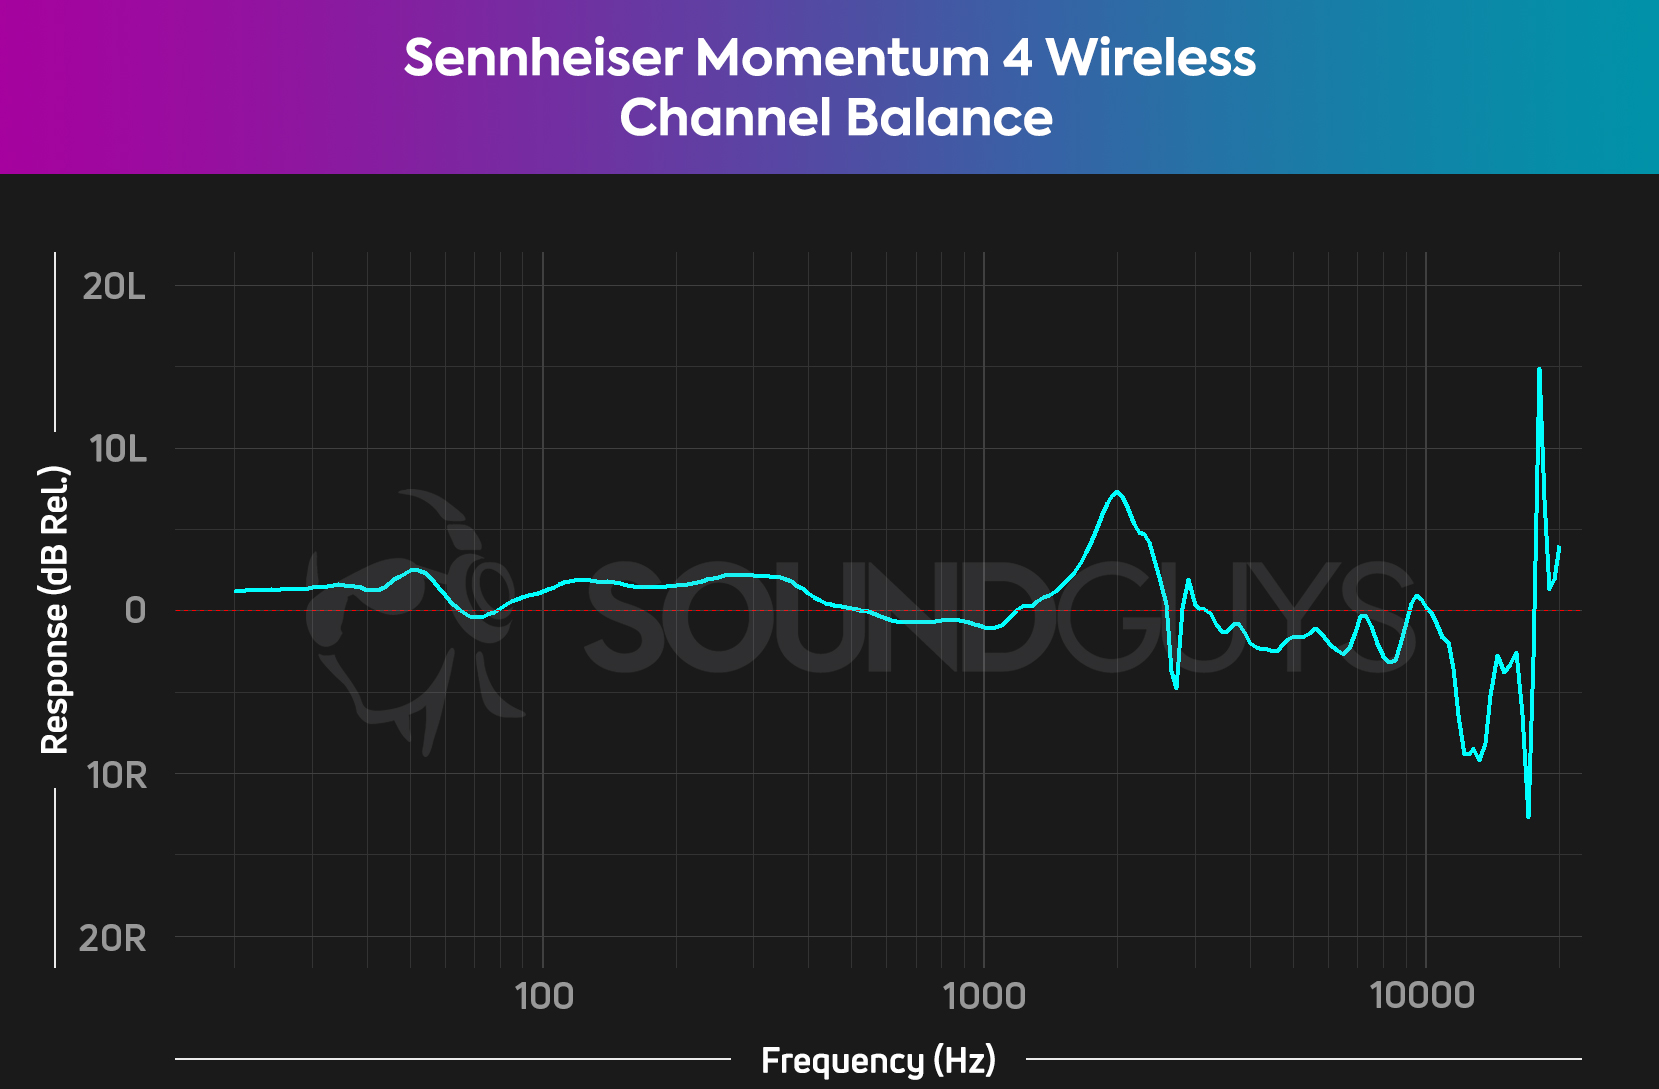 The Sennheiser Momentum 4 Wireless has some channel balance issues, that, while minor, may be noticeable to highly-trained ears.